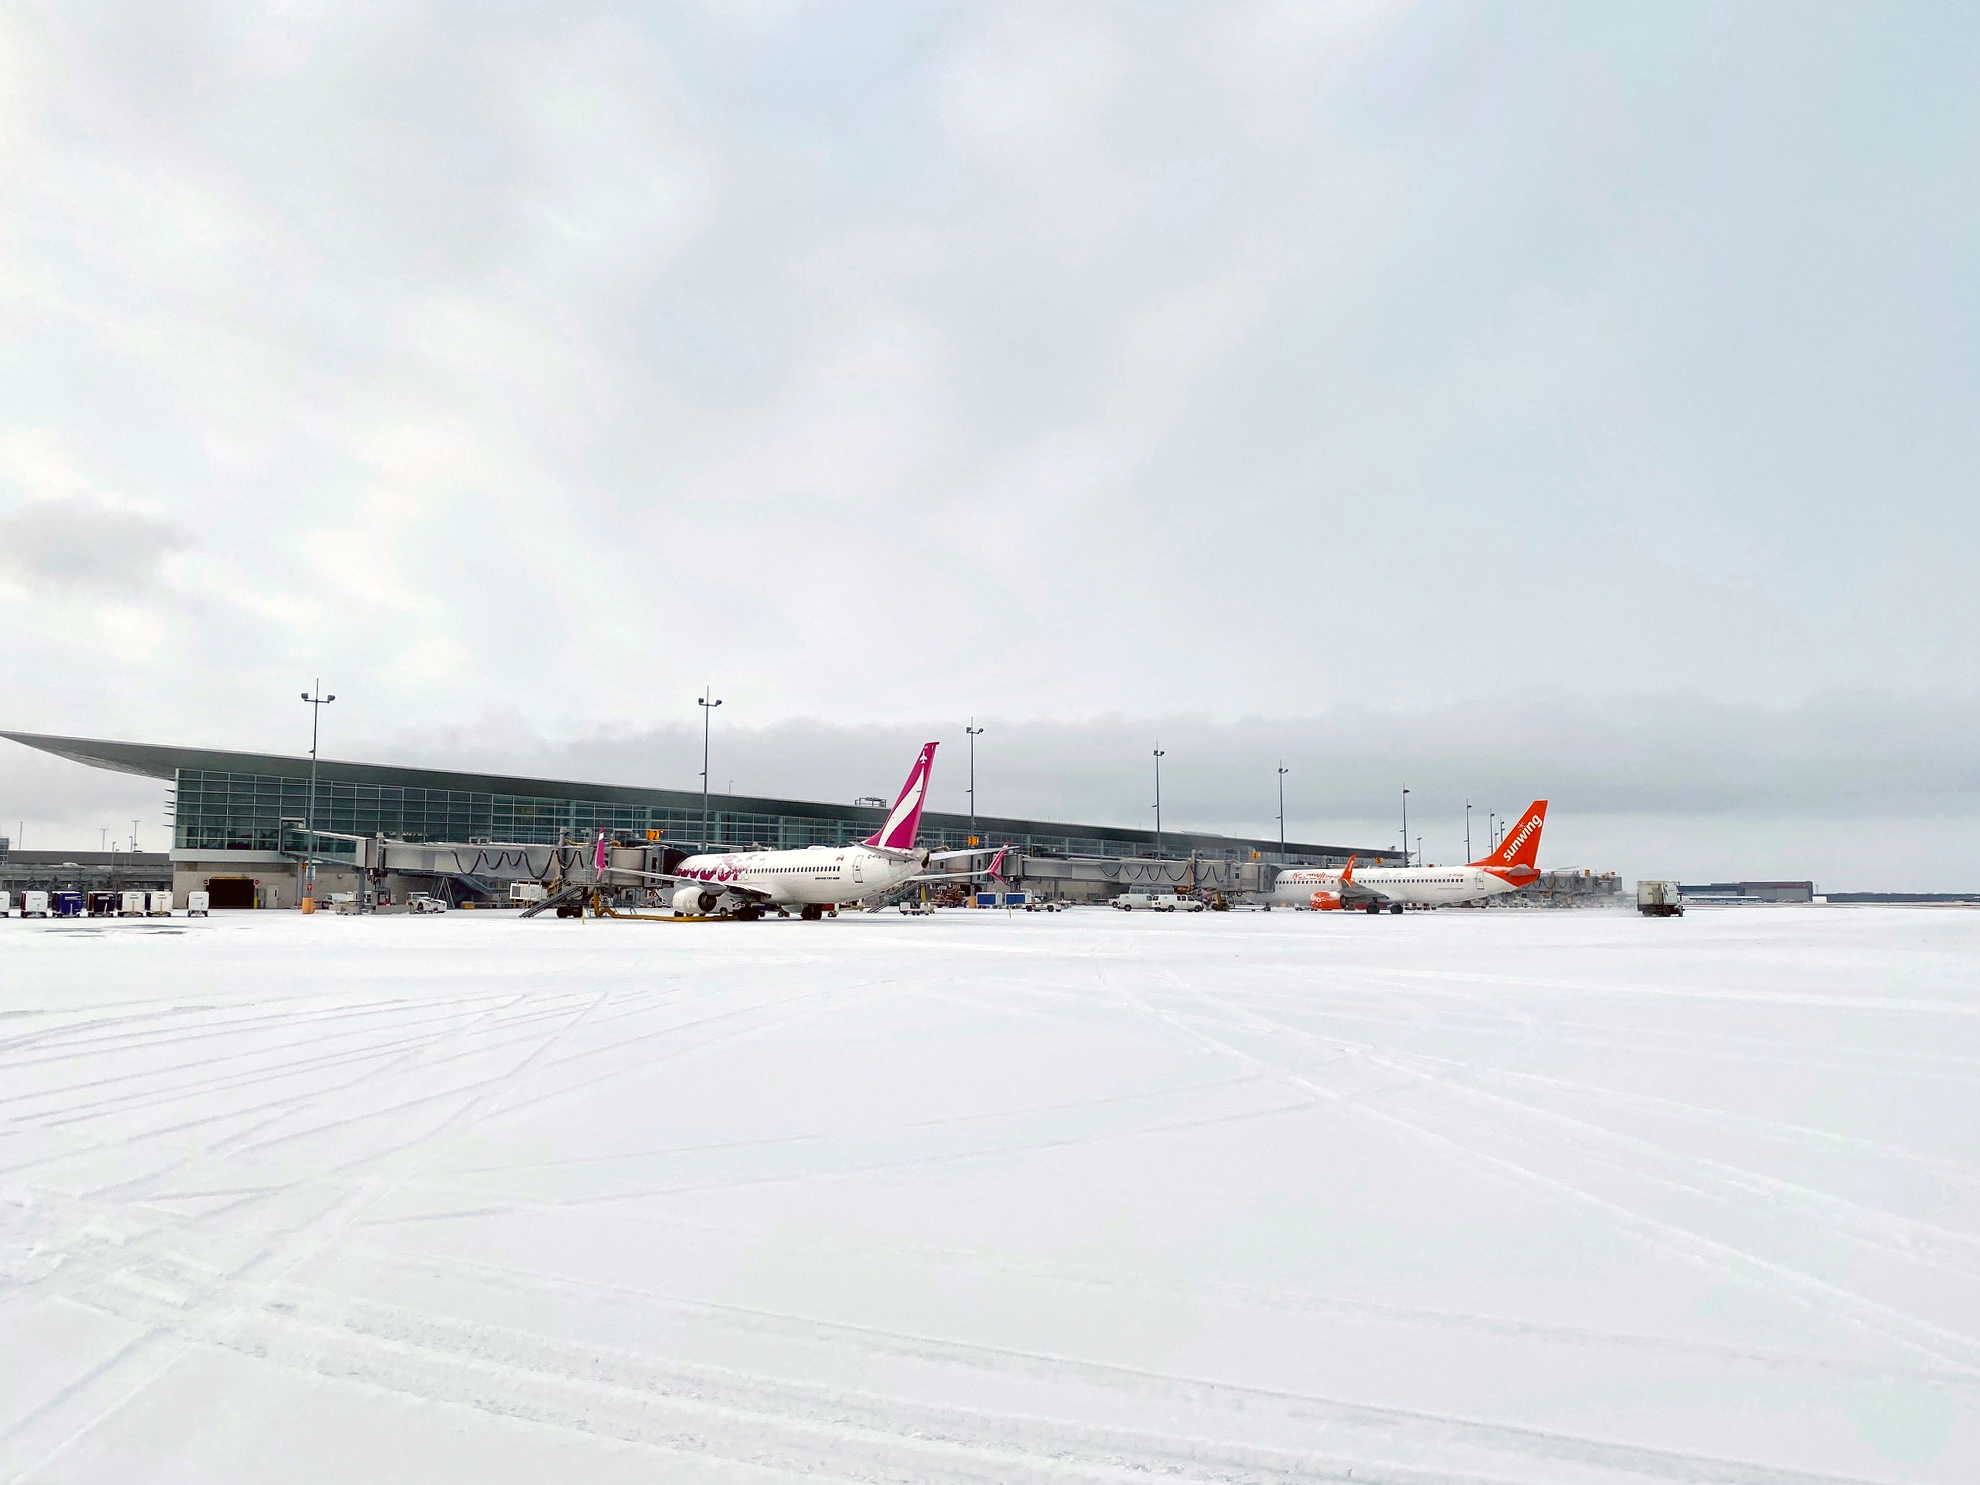 A Swoop and a Sunwing plane are parked at the boarding bridges of Winnipeg Richardson International Airport with a snow-covered apron surrounding them.